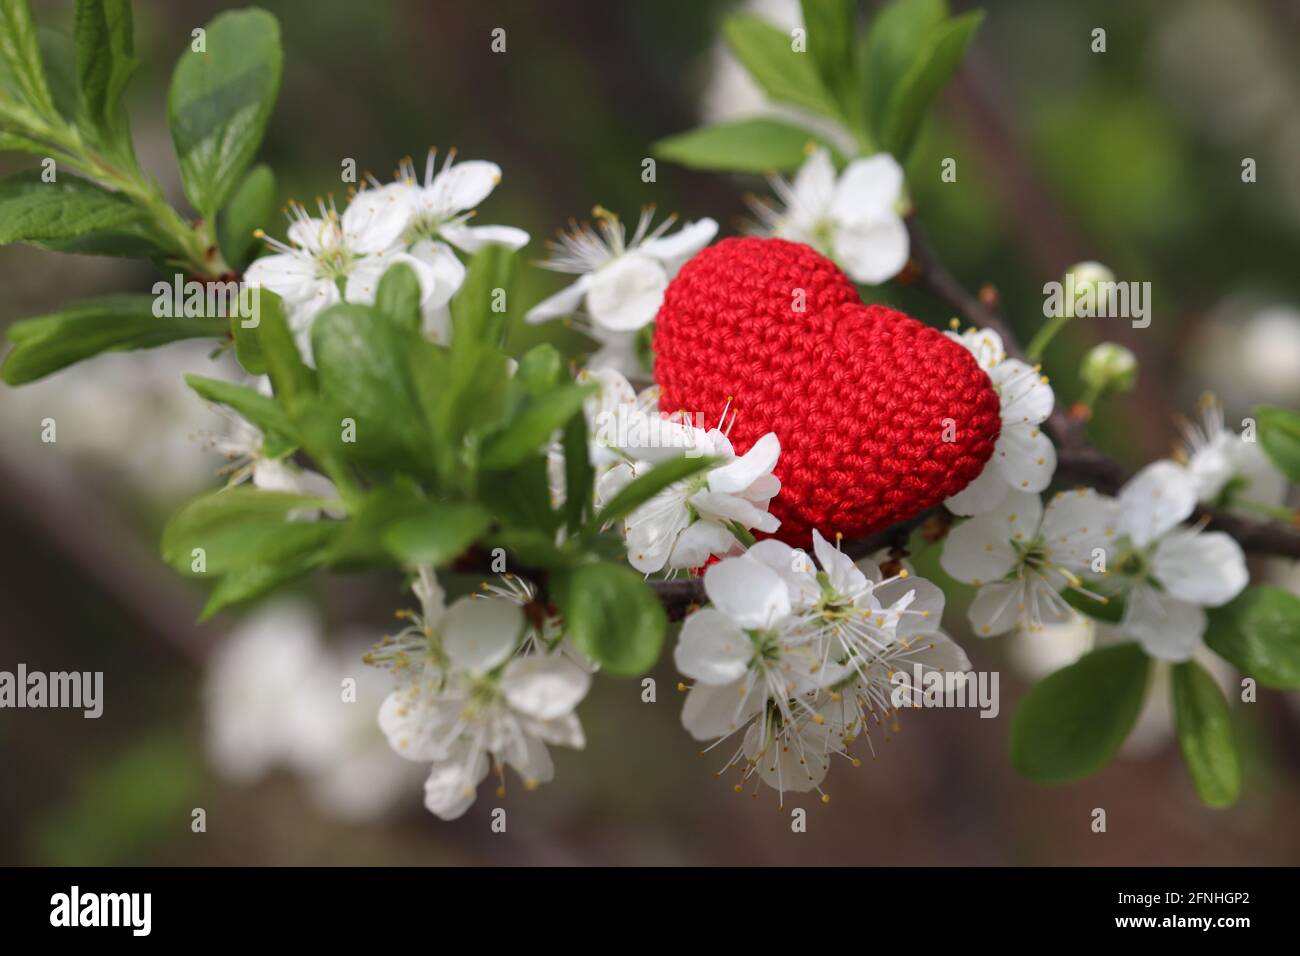 Love heart and cherry blossom in spring. White flowers and red knitted symbol of passion on a branch in a blooming garden Stock Photo